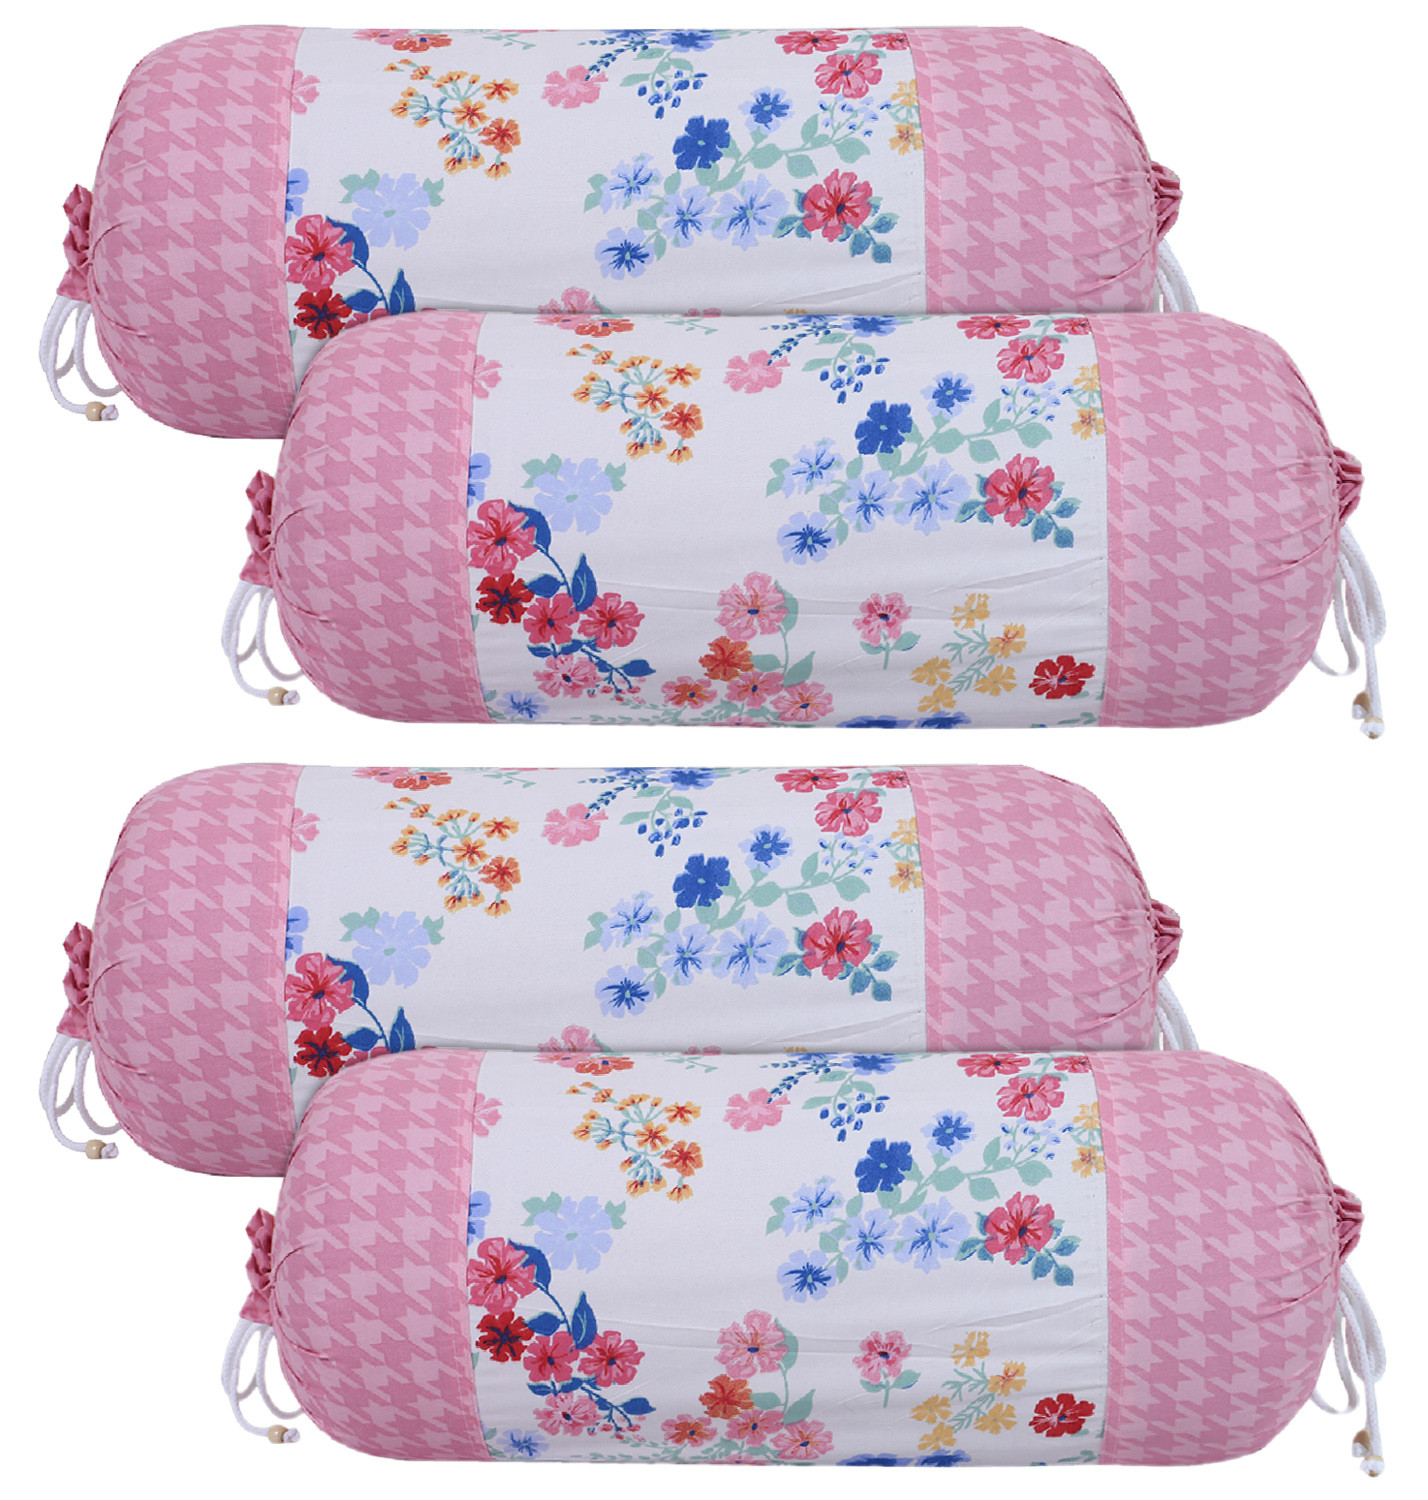 Kuber Industries Cotton Floral Print Attractive Bolster Cover With Drawstring for Home Décor,(White)